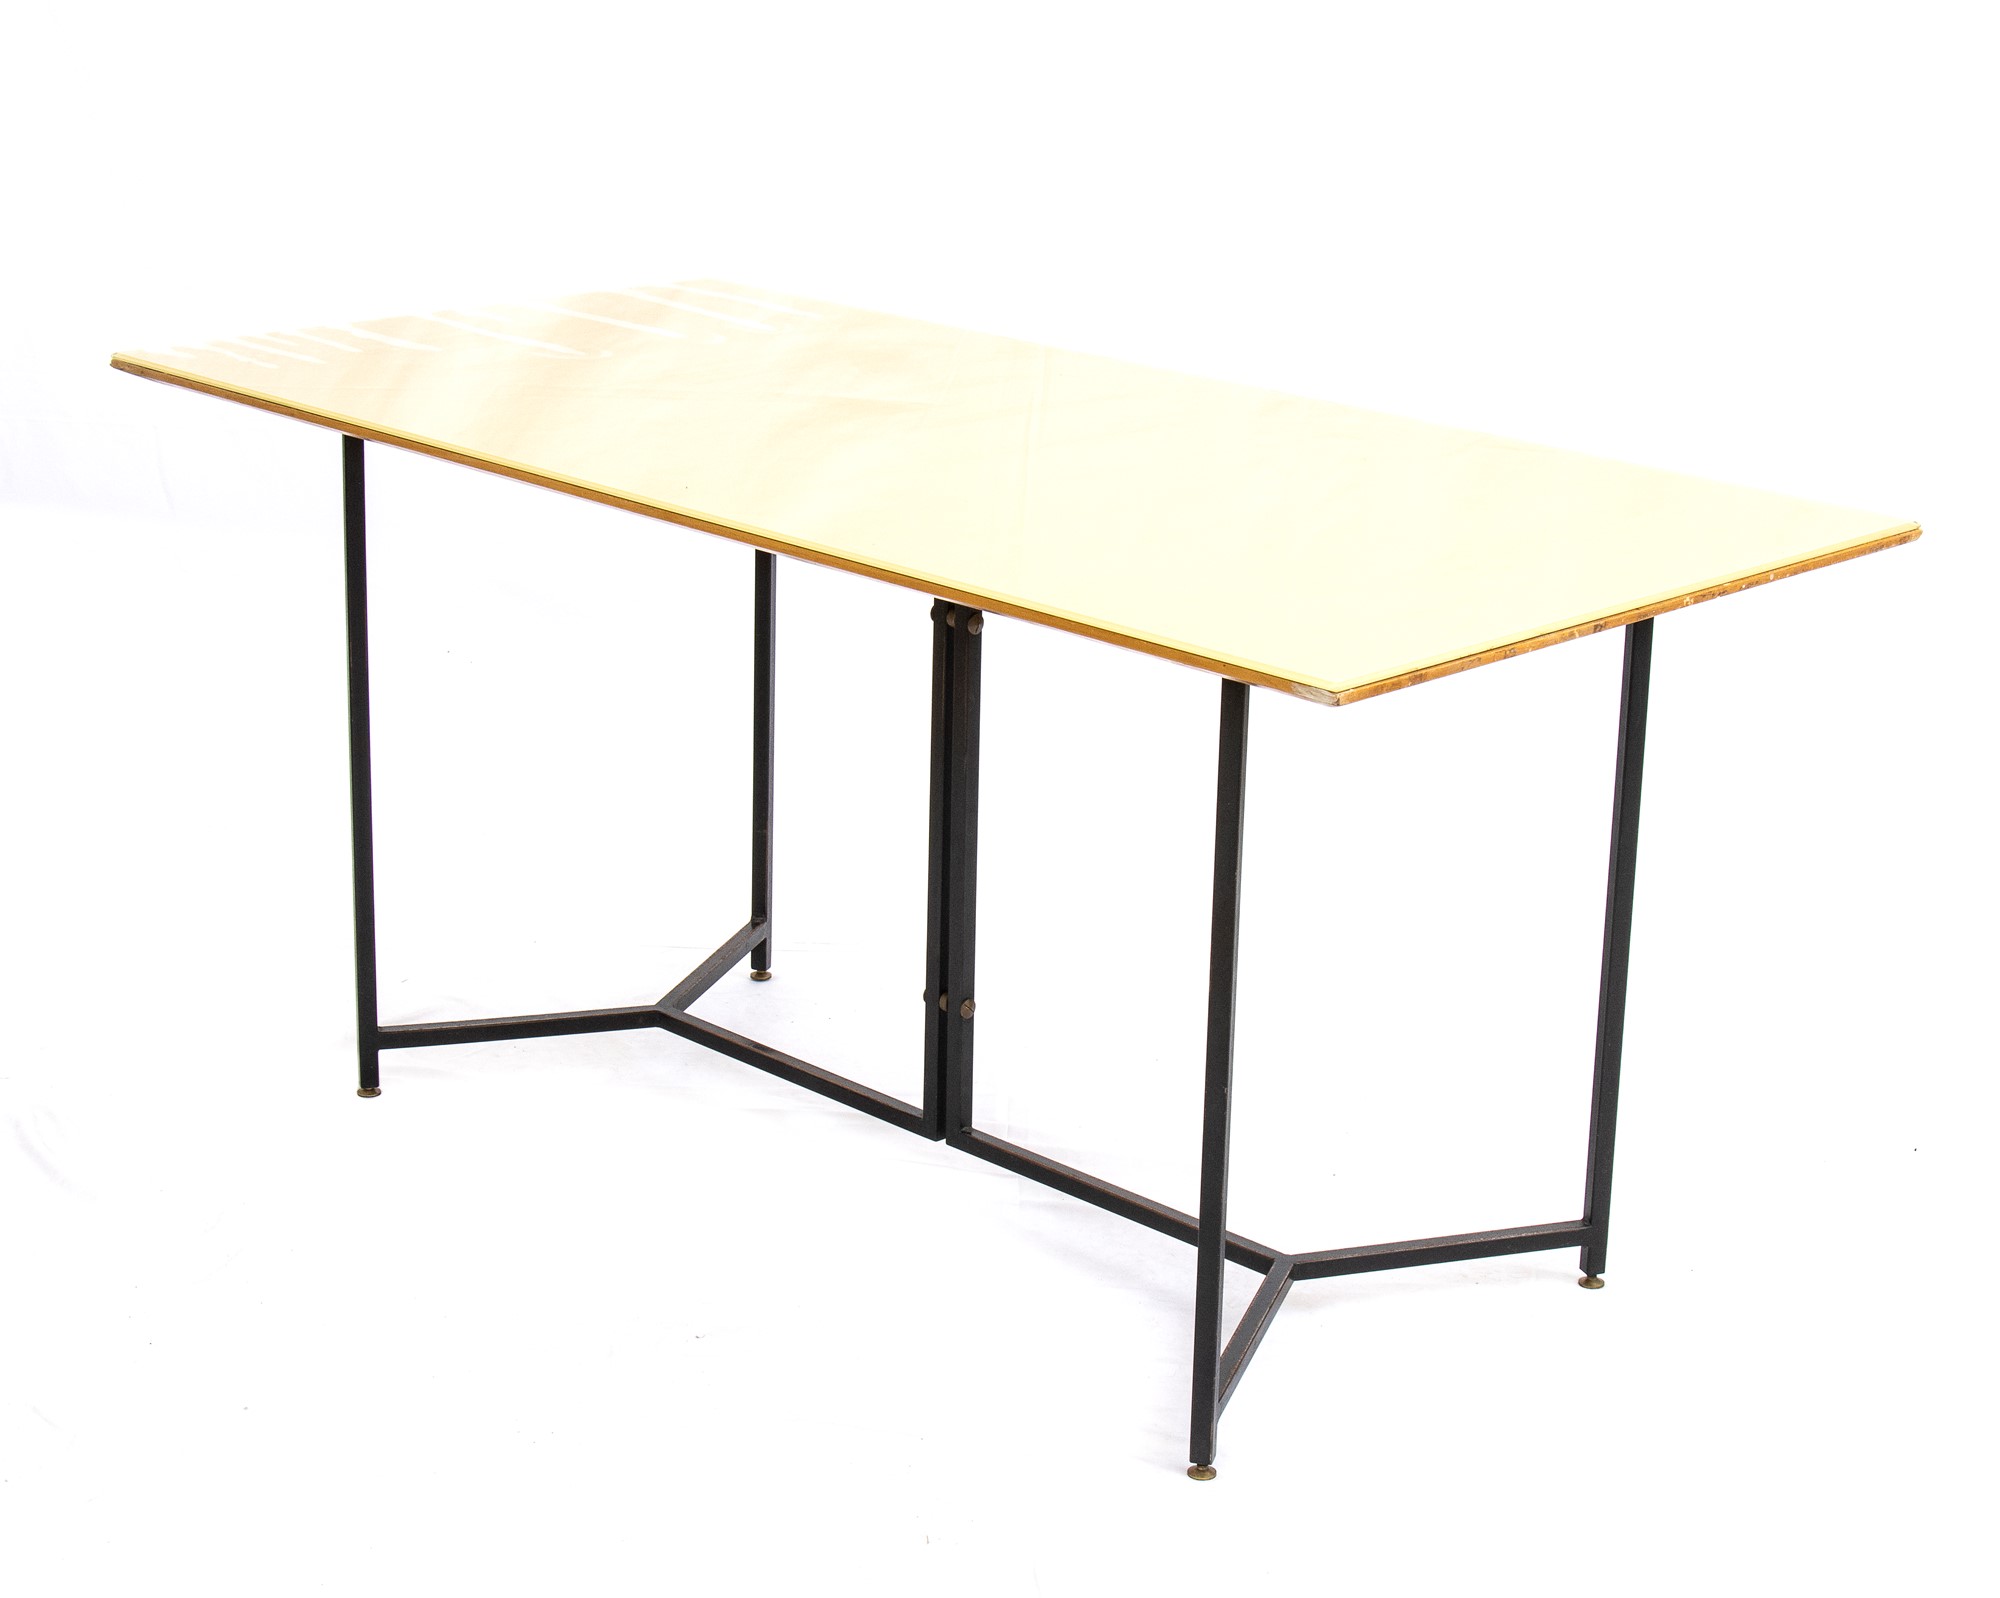 Rectangular table with metal structure and wooden and glass top - Image 8 of 10